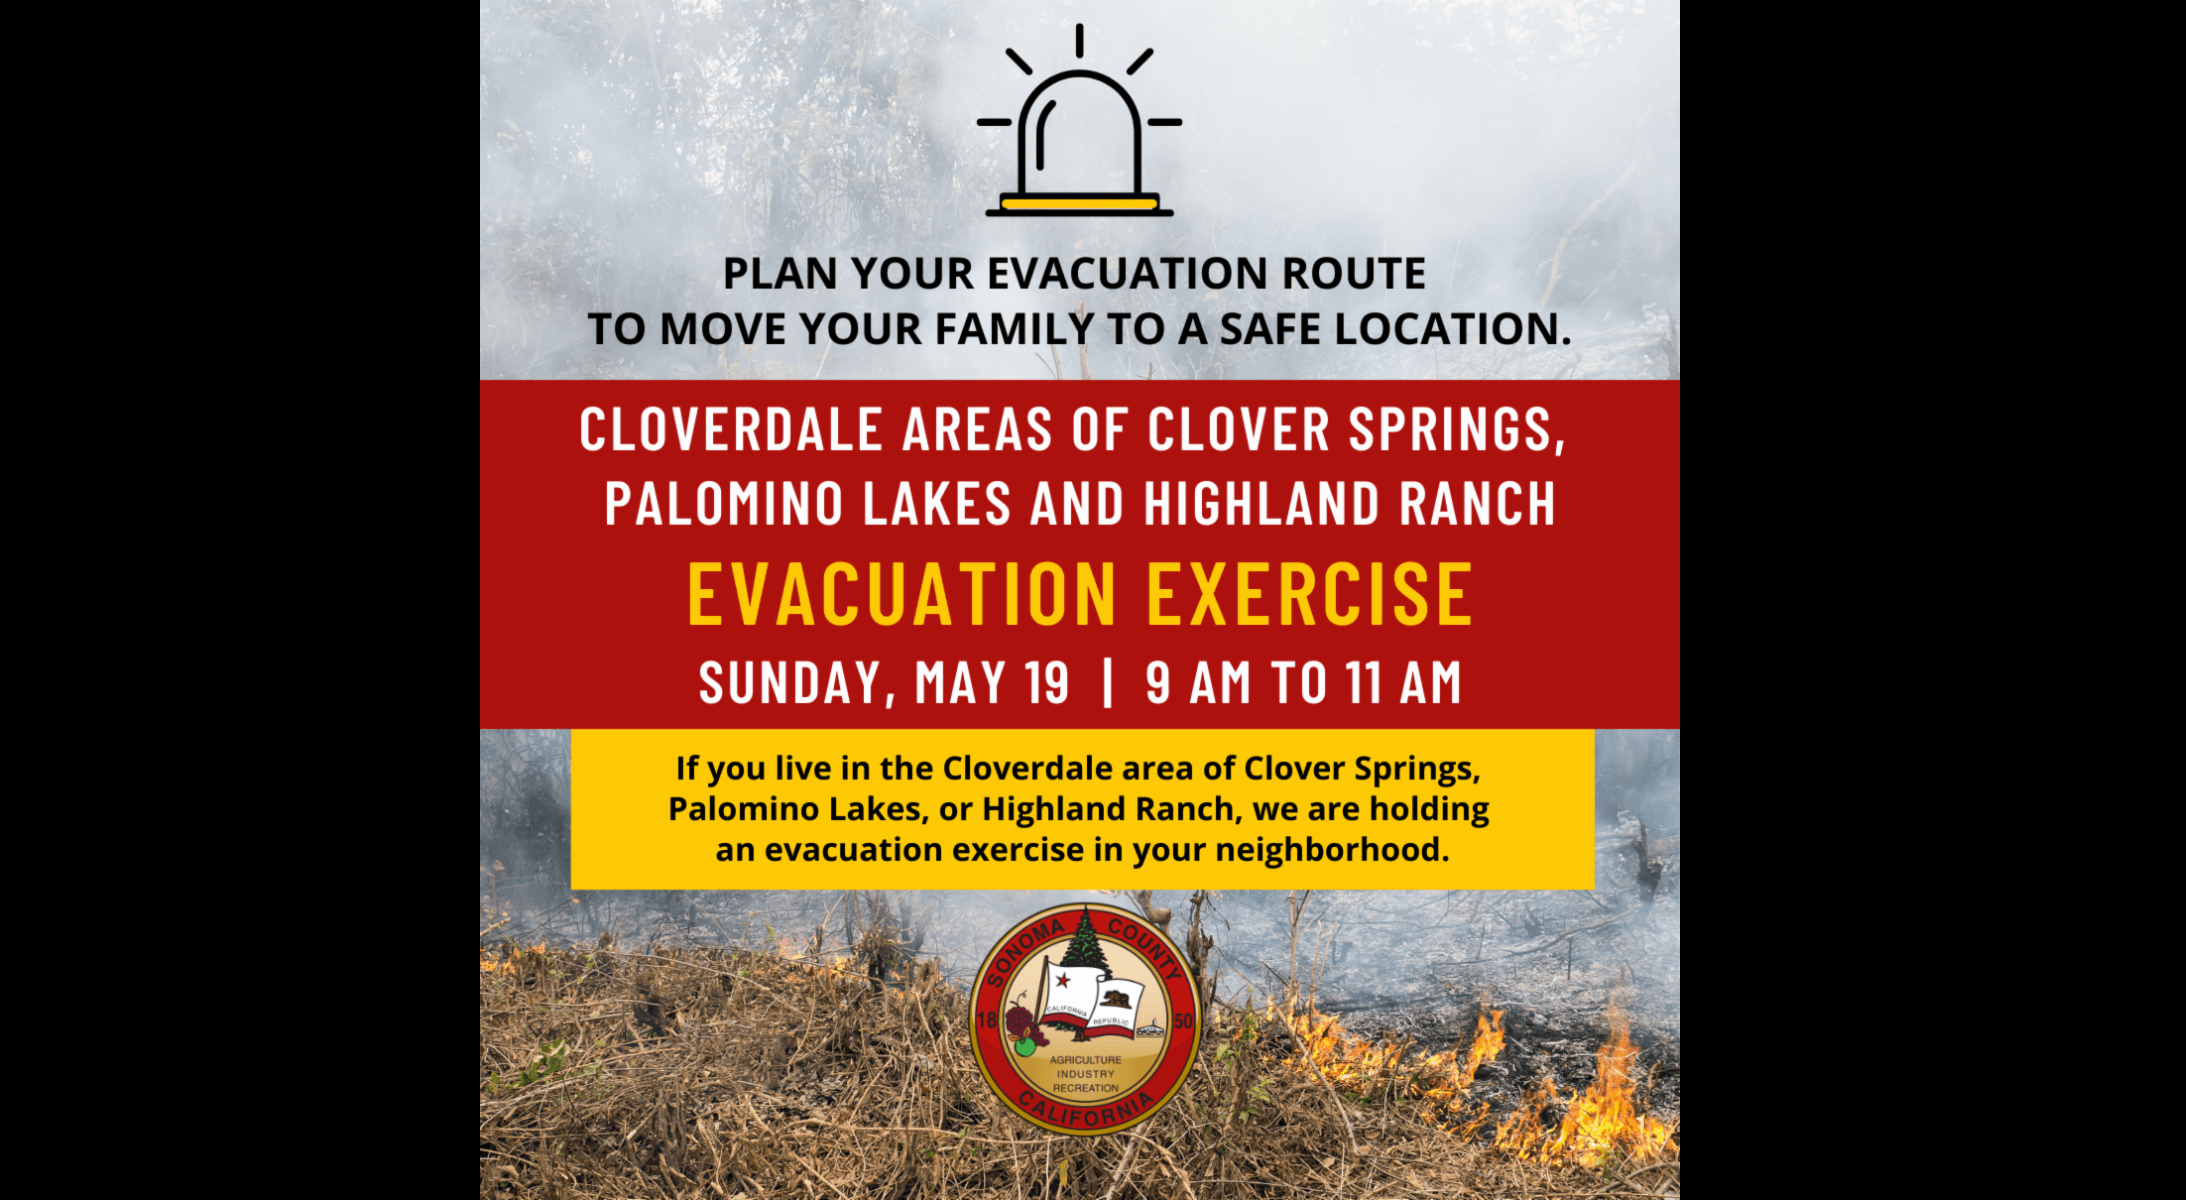 announcement-for-cloverdale-evacuation-drill-for-sunday-may-19th-county-of-sonoma